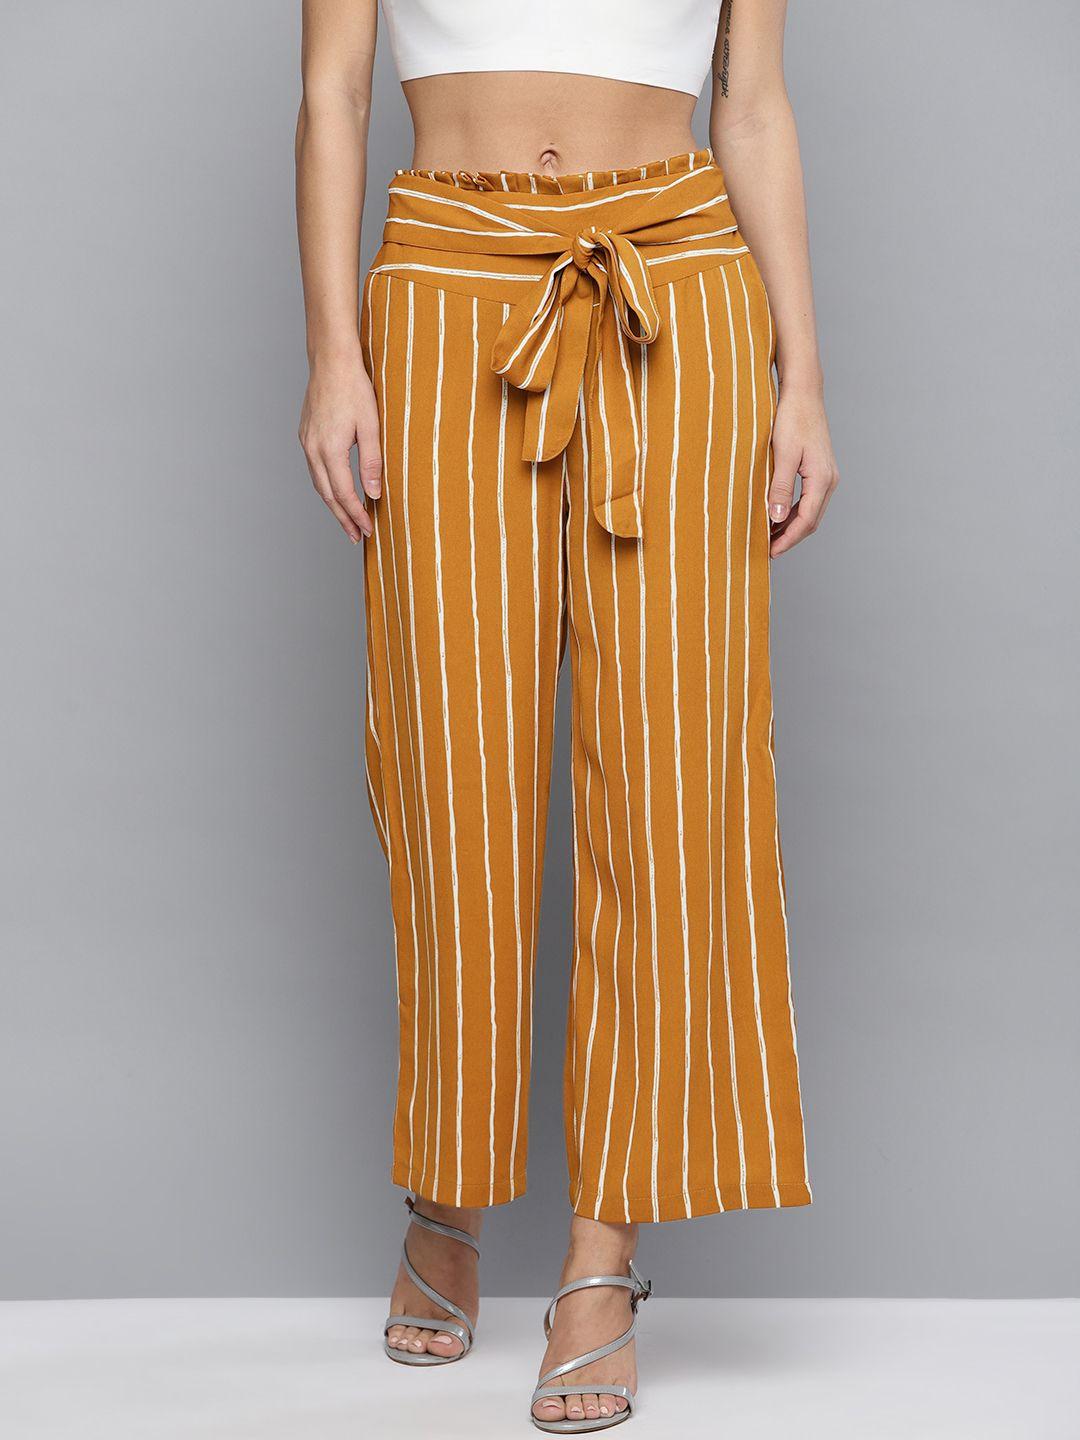 marie claire women mustard yellow & white original fit high rise striped parallel trousers